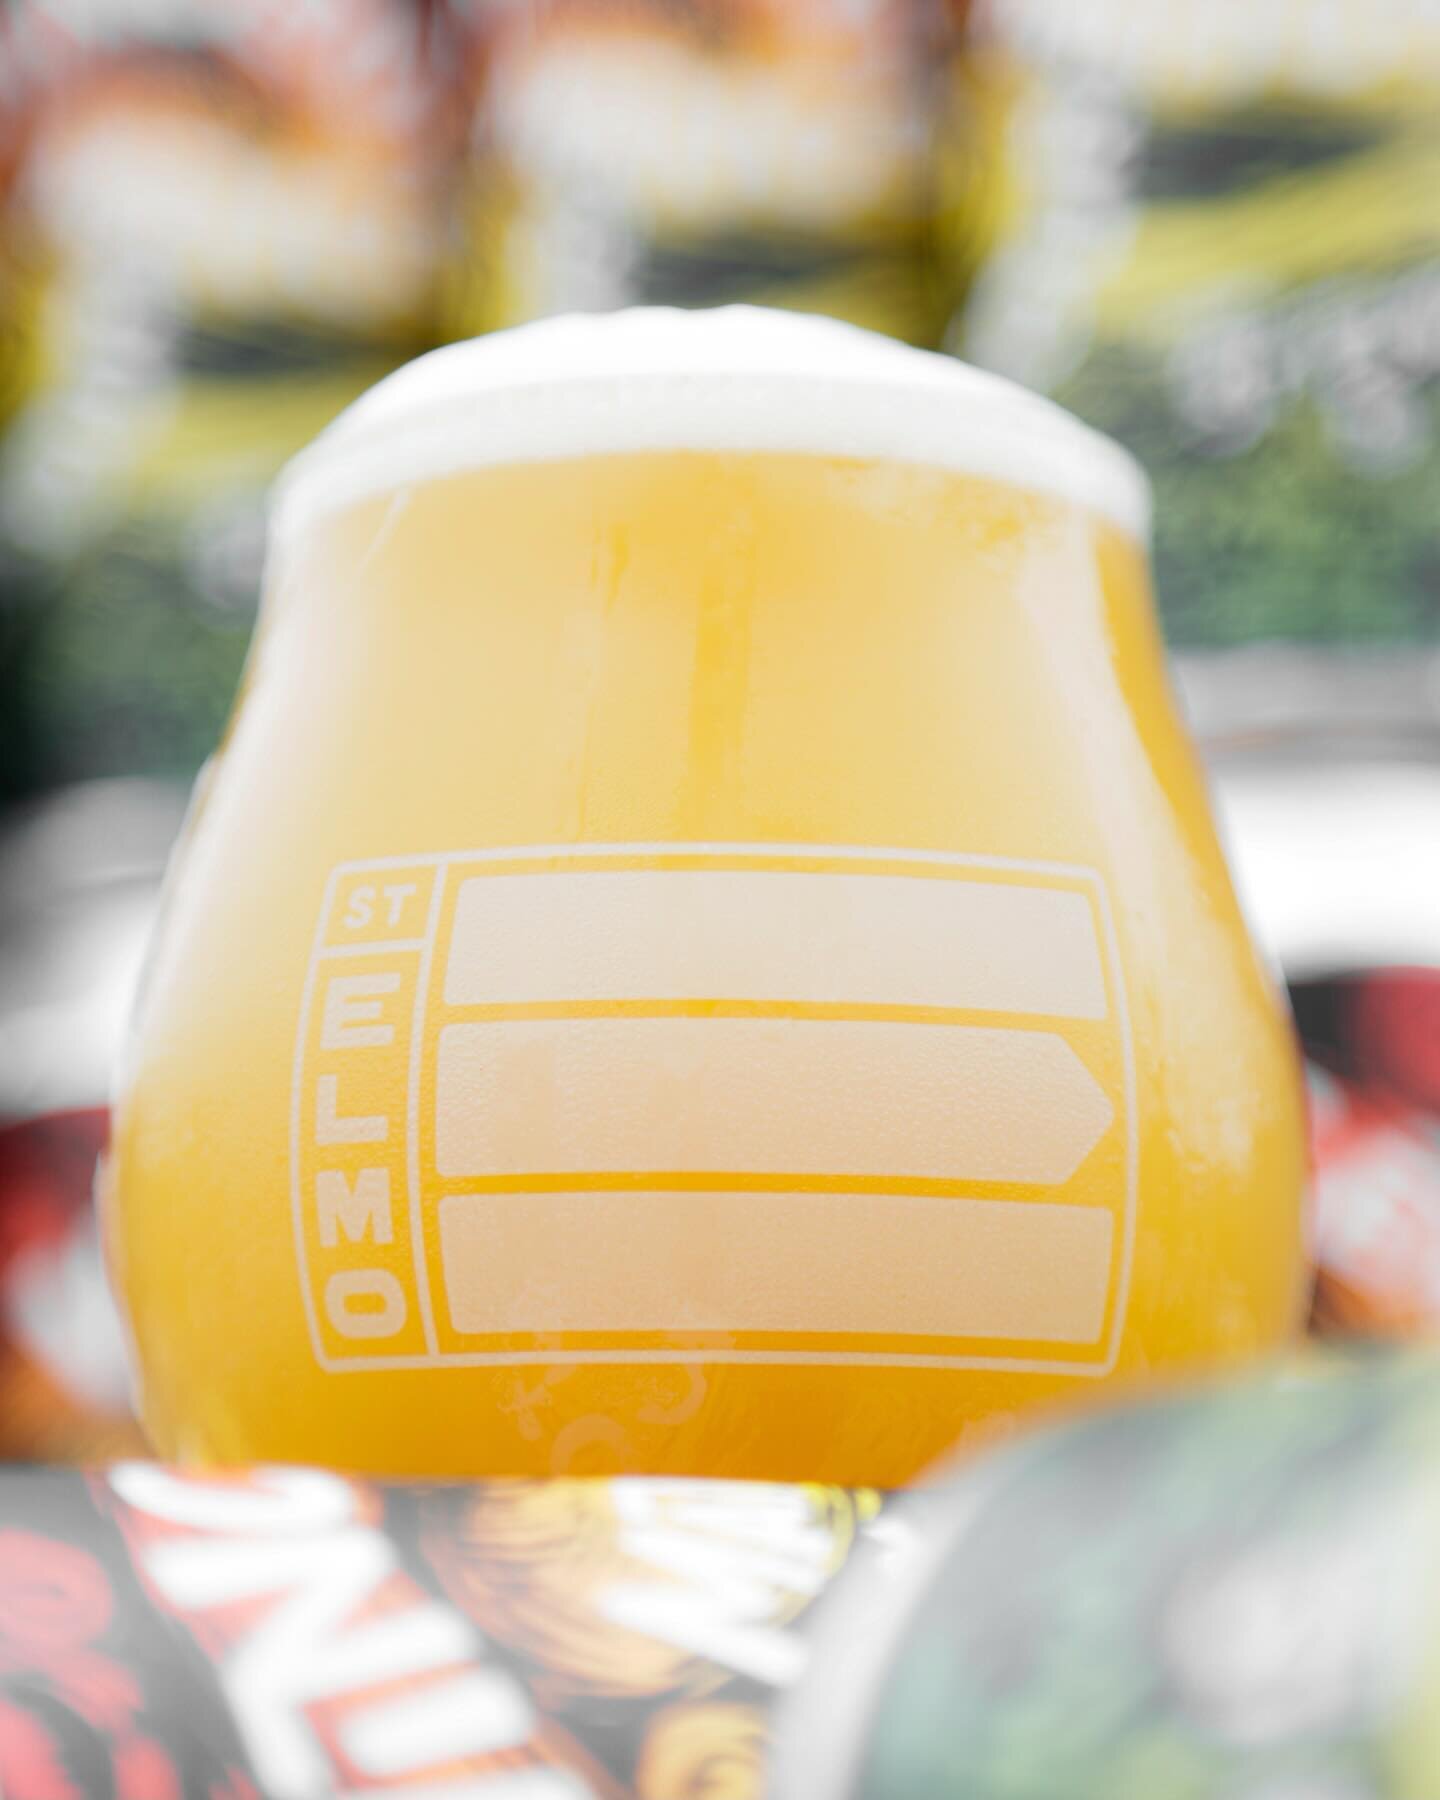 🥭🦩🥭🦩 VINCENT 🦩🥭🦩🥭

Our Mango Kettle Sour has returned! Packed with a whopping 420 pounds of mango, Vincent delivers a one-two punch of tropical tartness and sweet deliciousness 😋 We&rsquo;re getting notes of Goya&reg; juice, mango glac&eacut